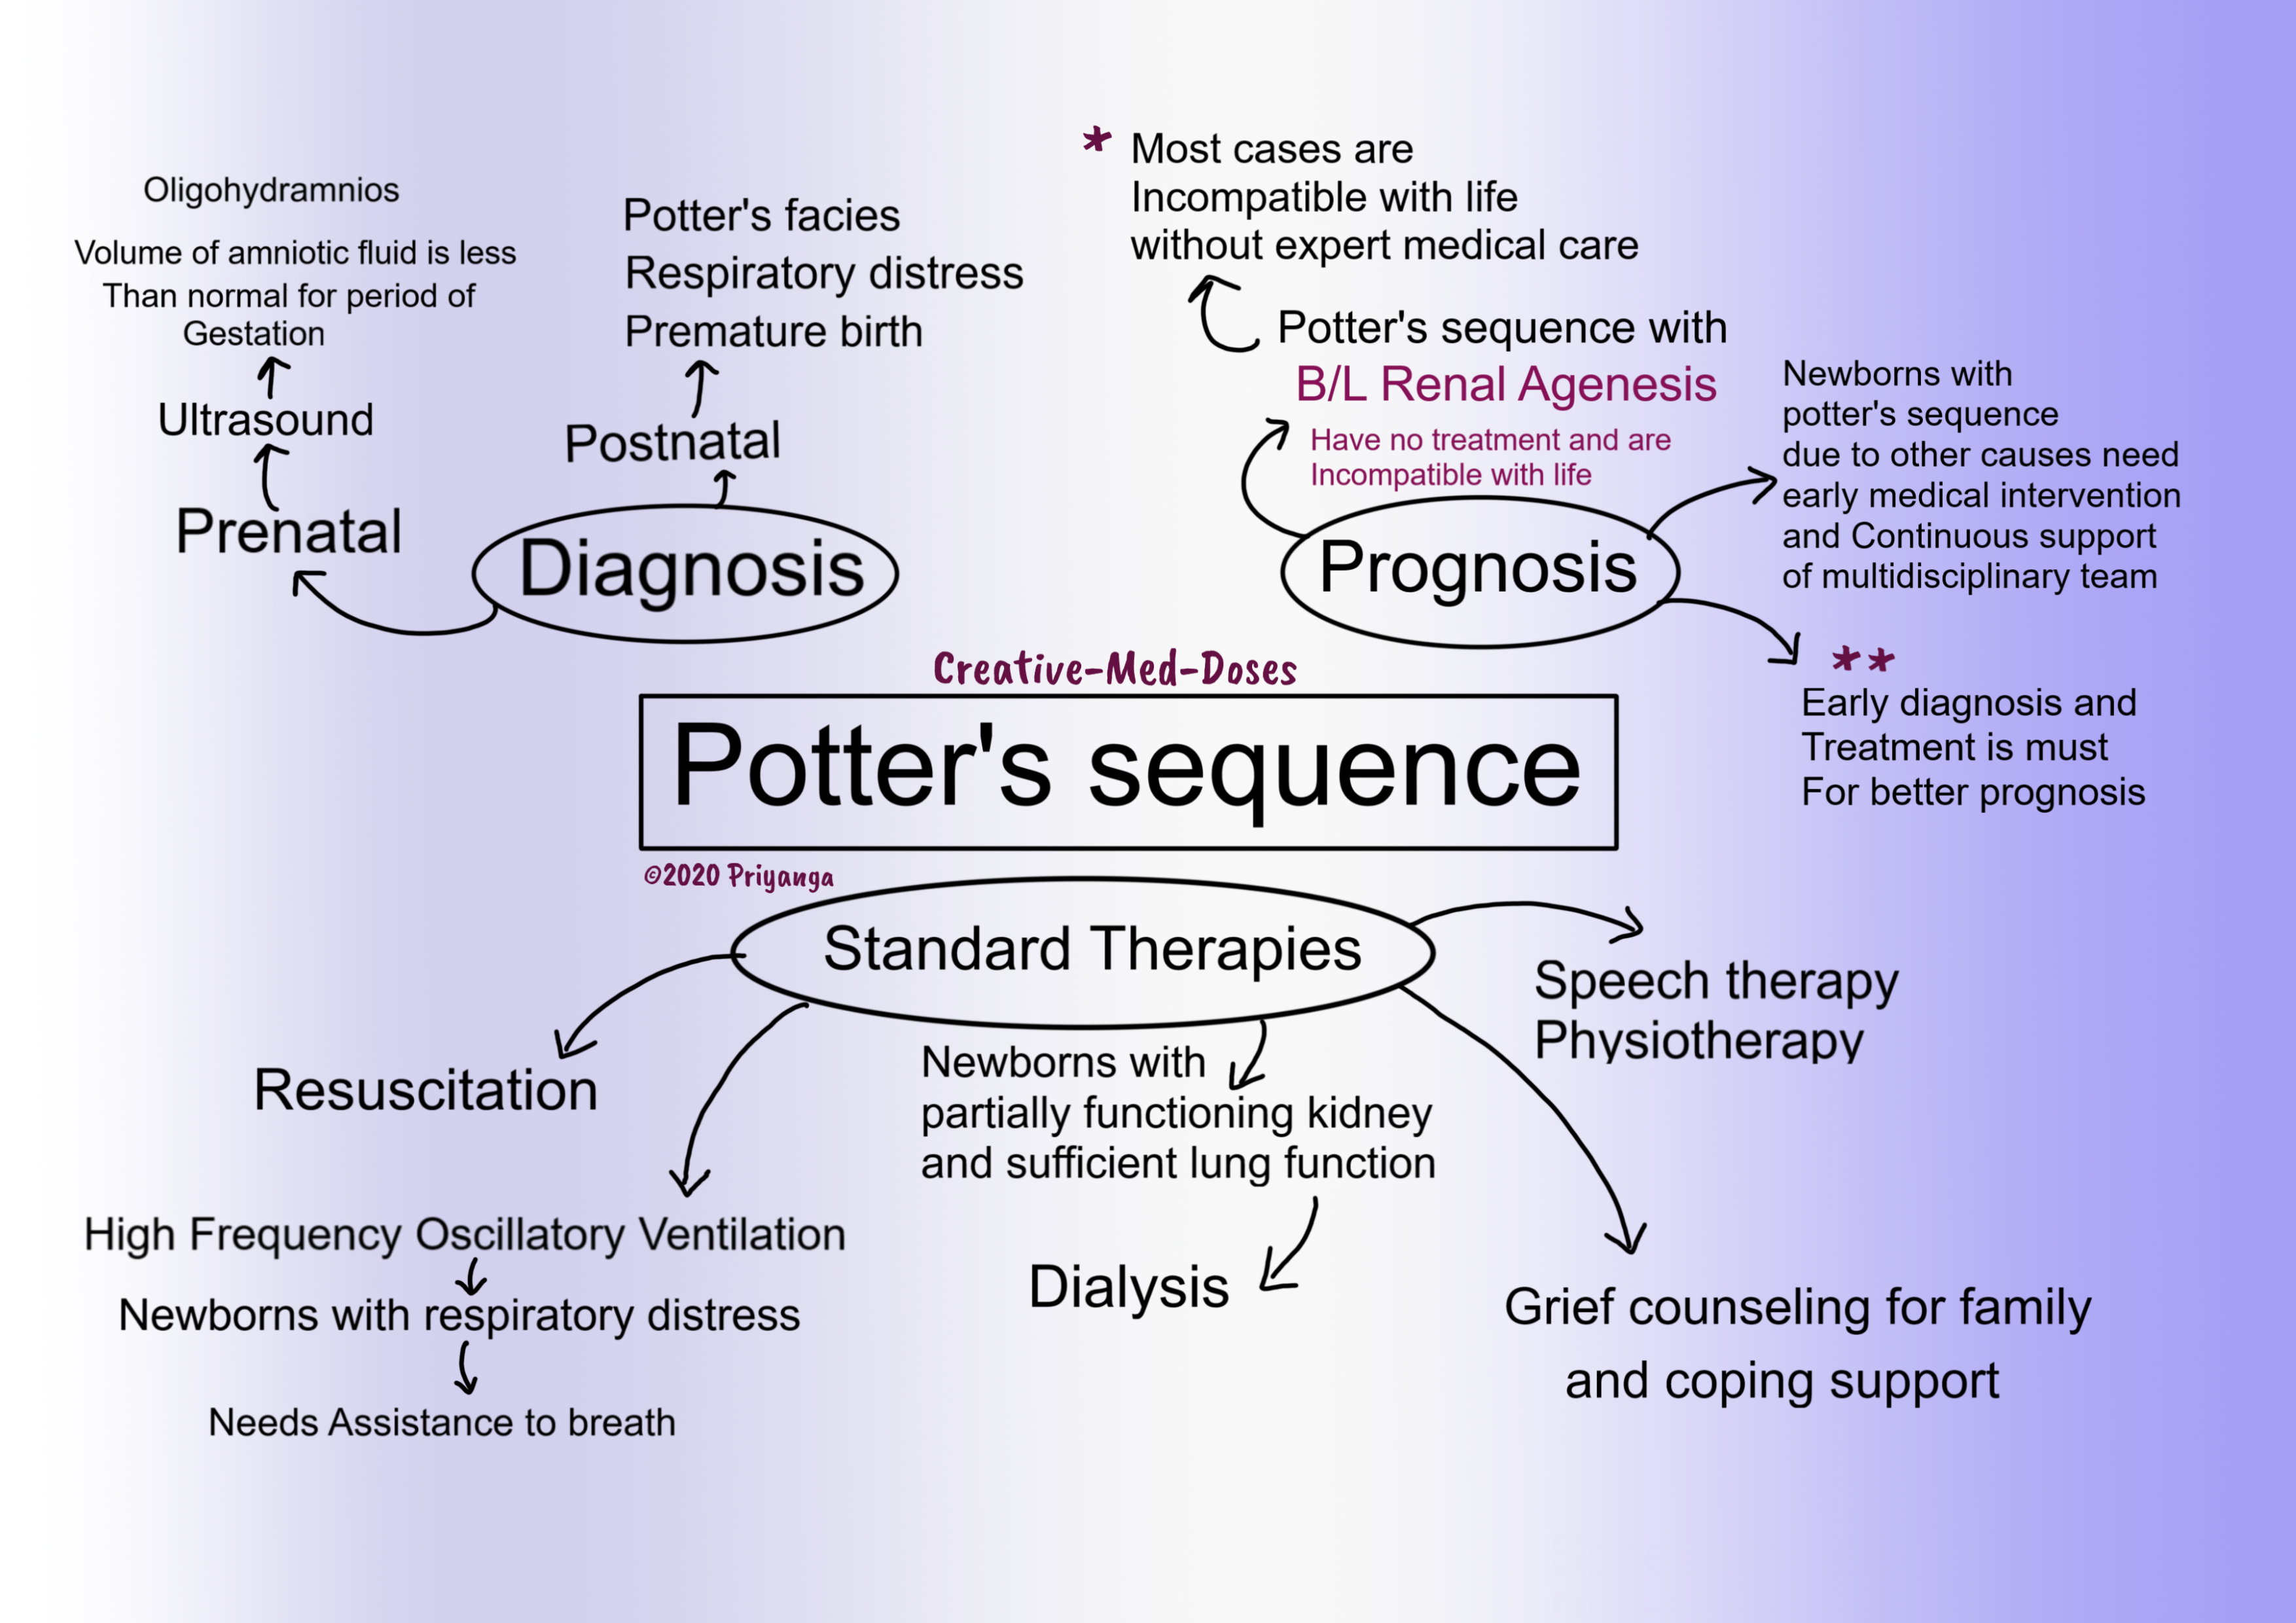 Potter's sequence diagnosis, prognosis and treatment 